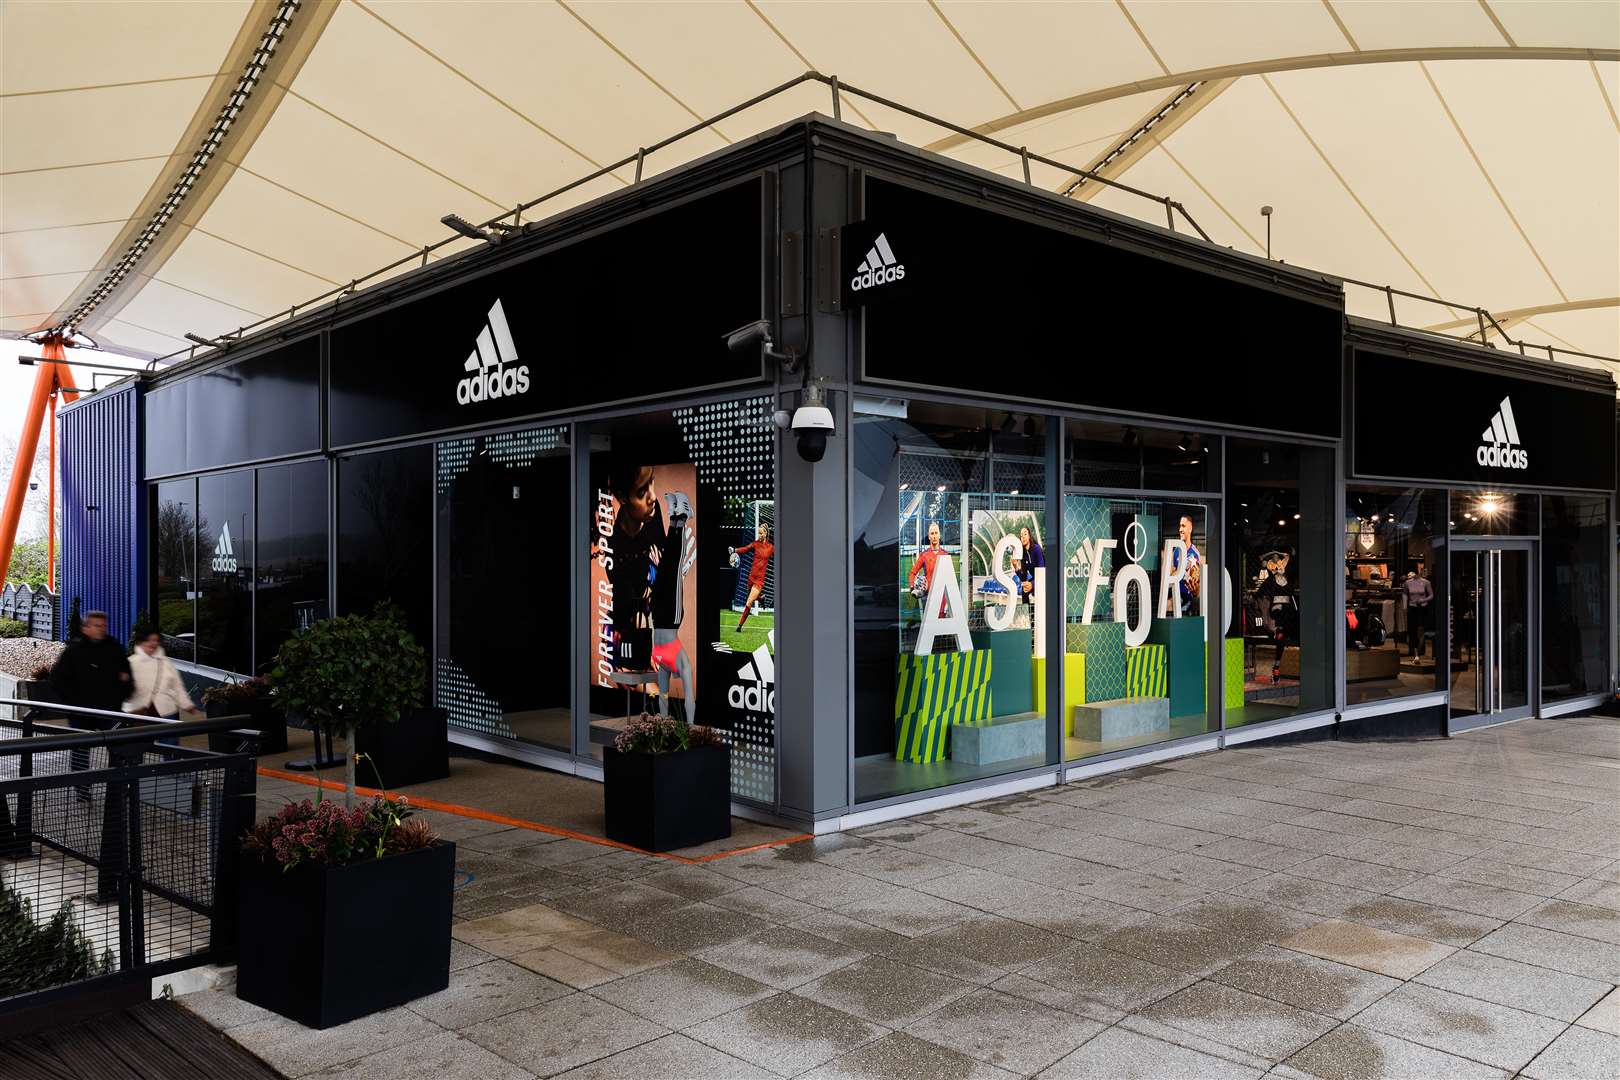 fuente A bordo no pagado Adidas reopens in former Polo Ralph Lauren unit at the Designer Outlet in  Ashford almost doubling in size